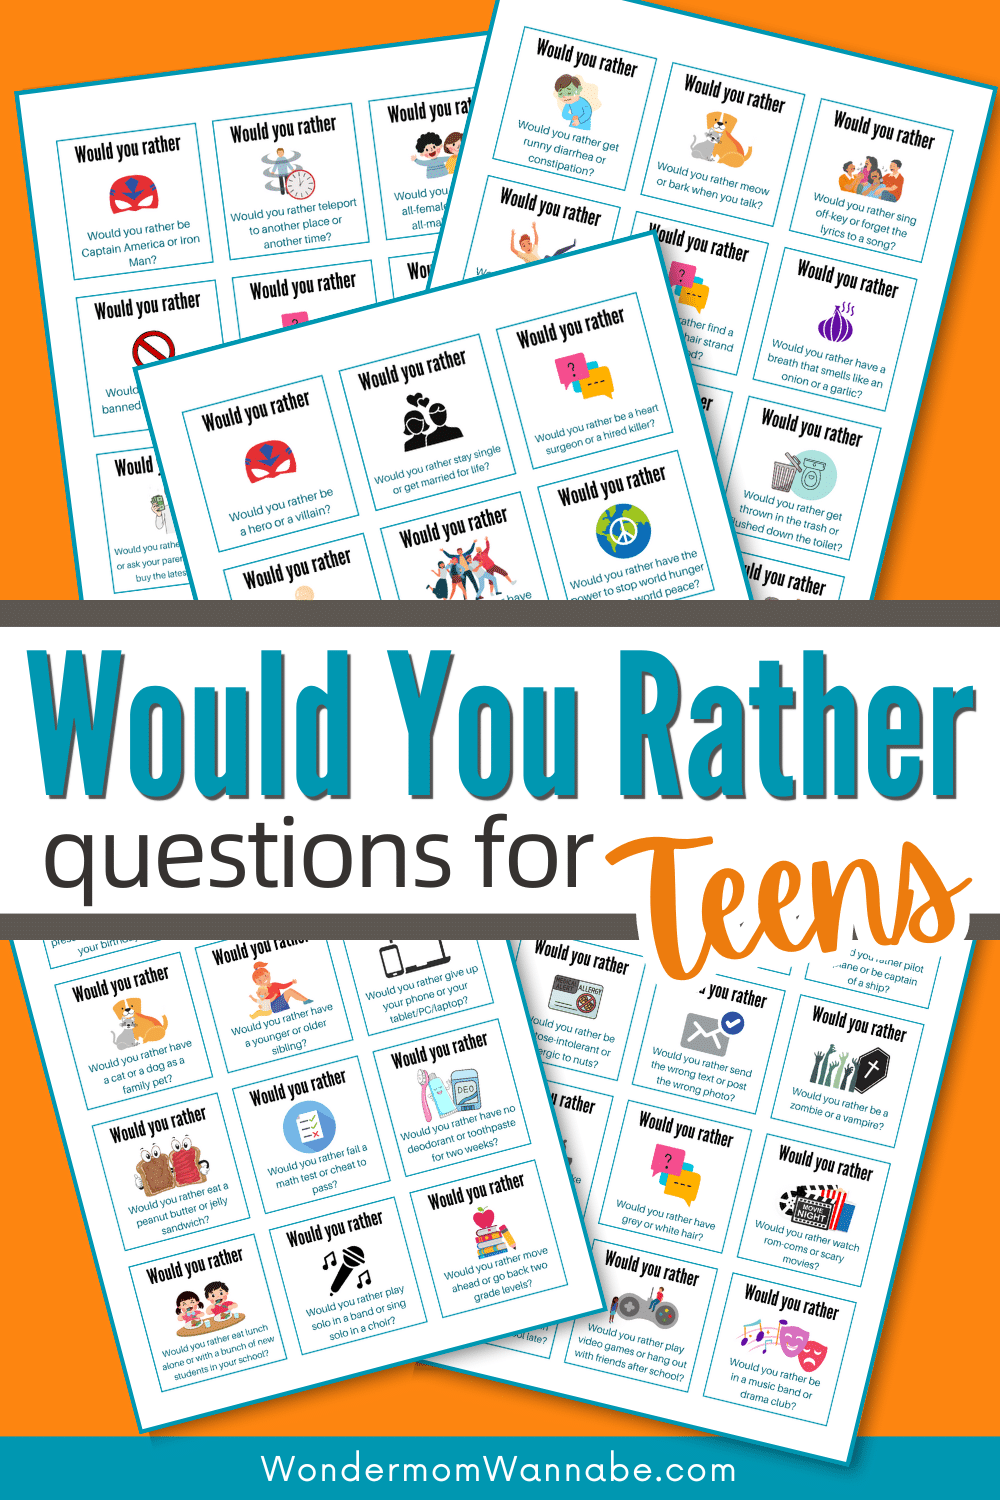 75 Would You Rather Questions for Teens -  Sweden